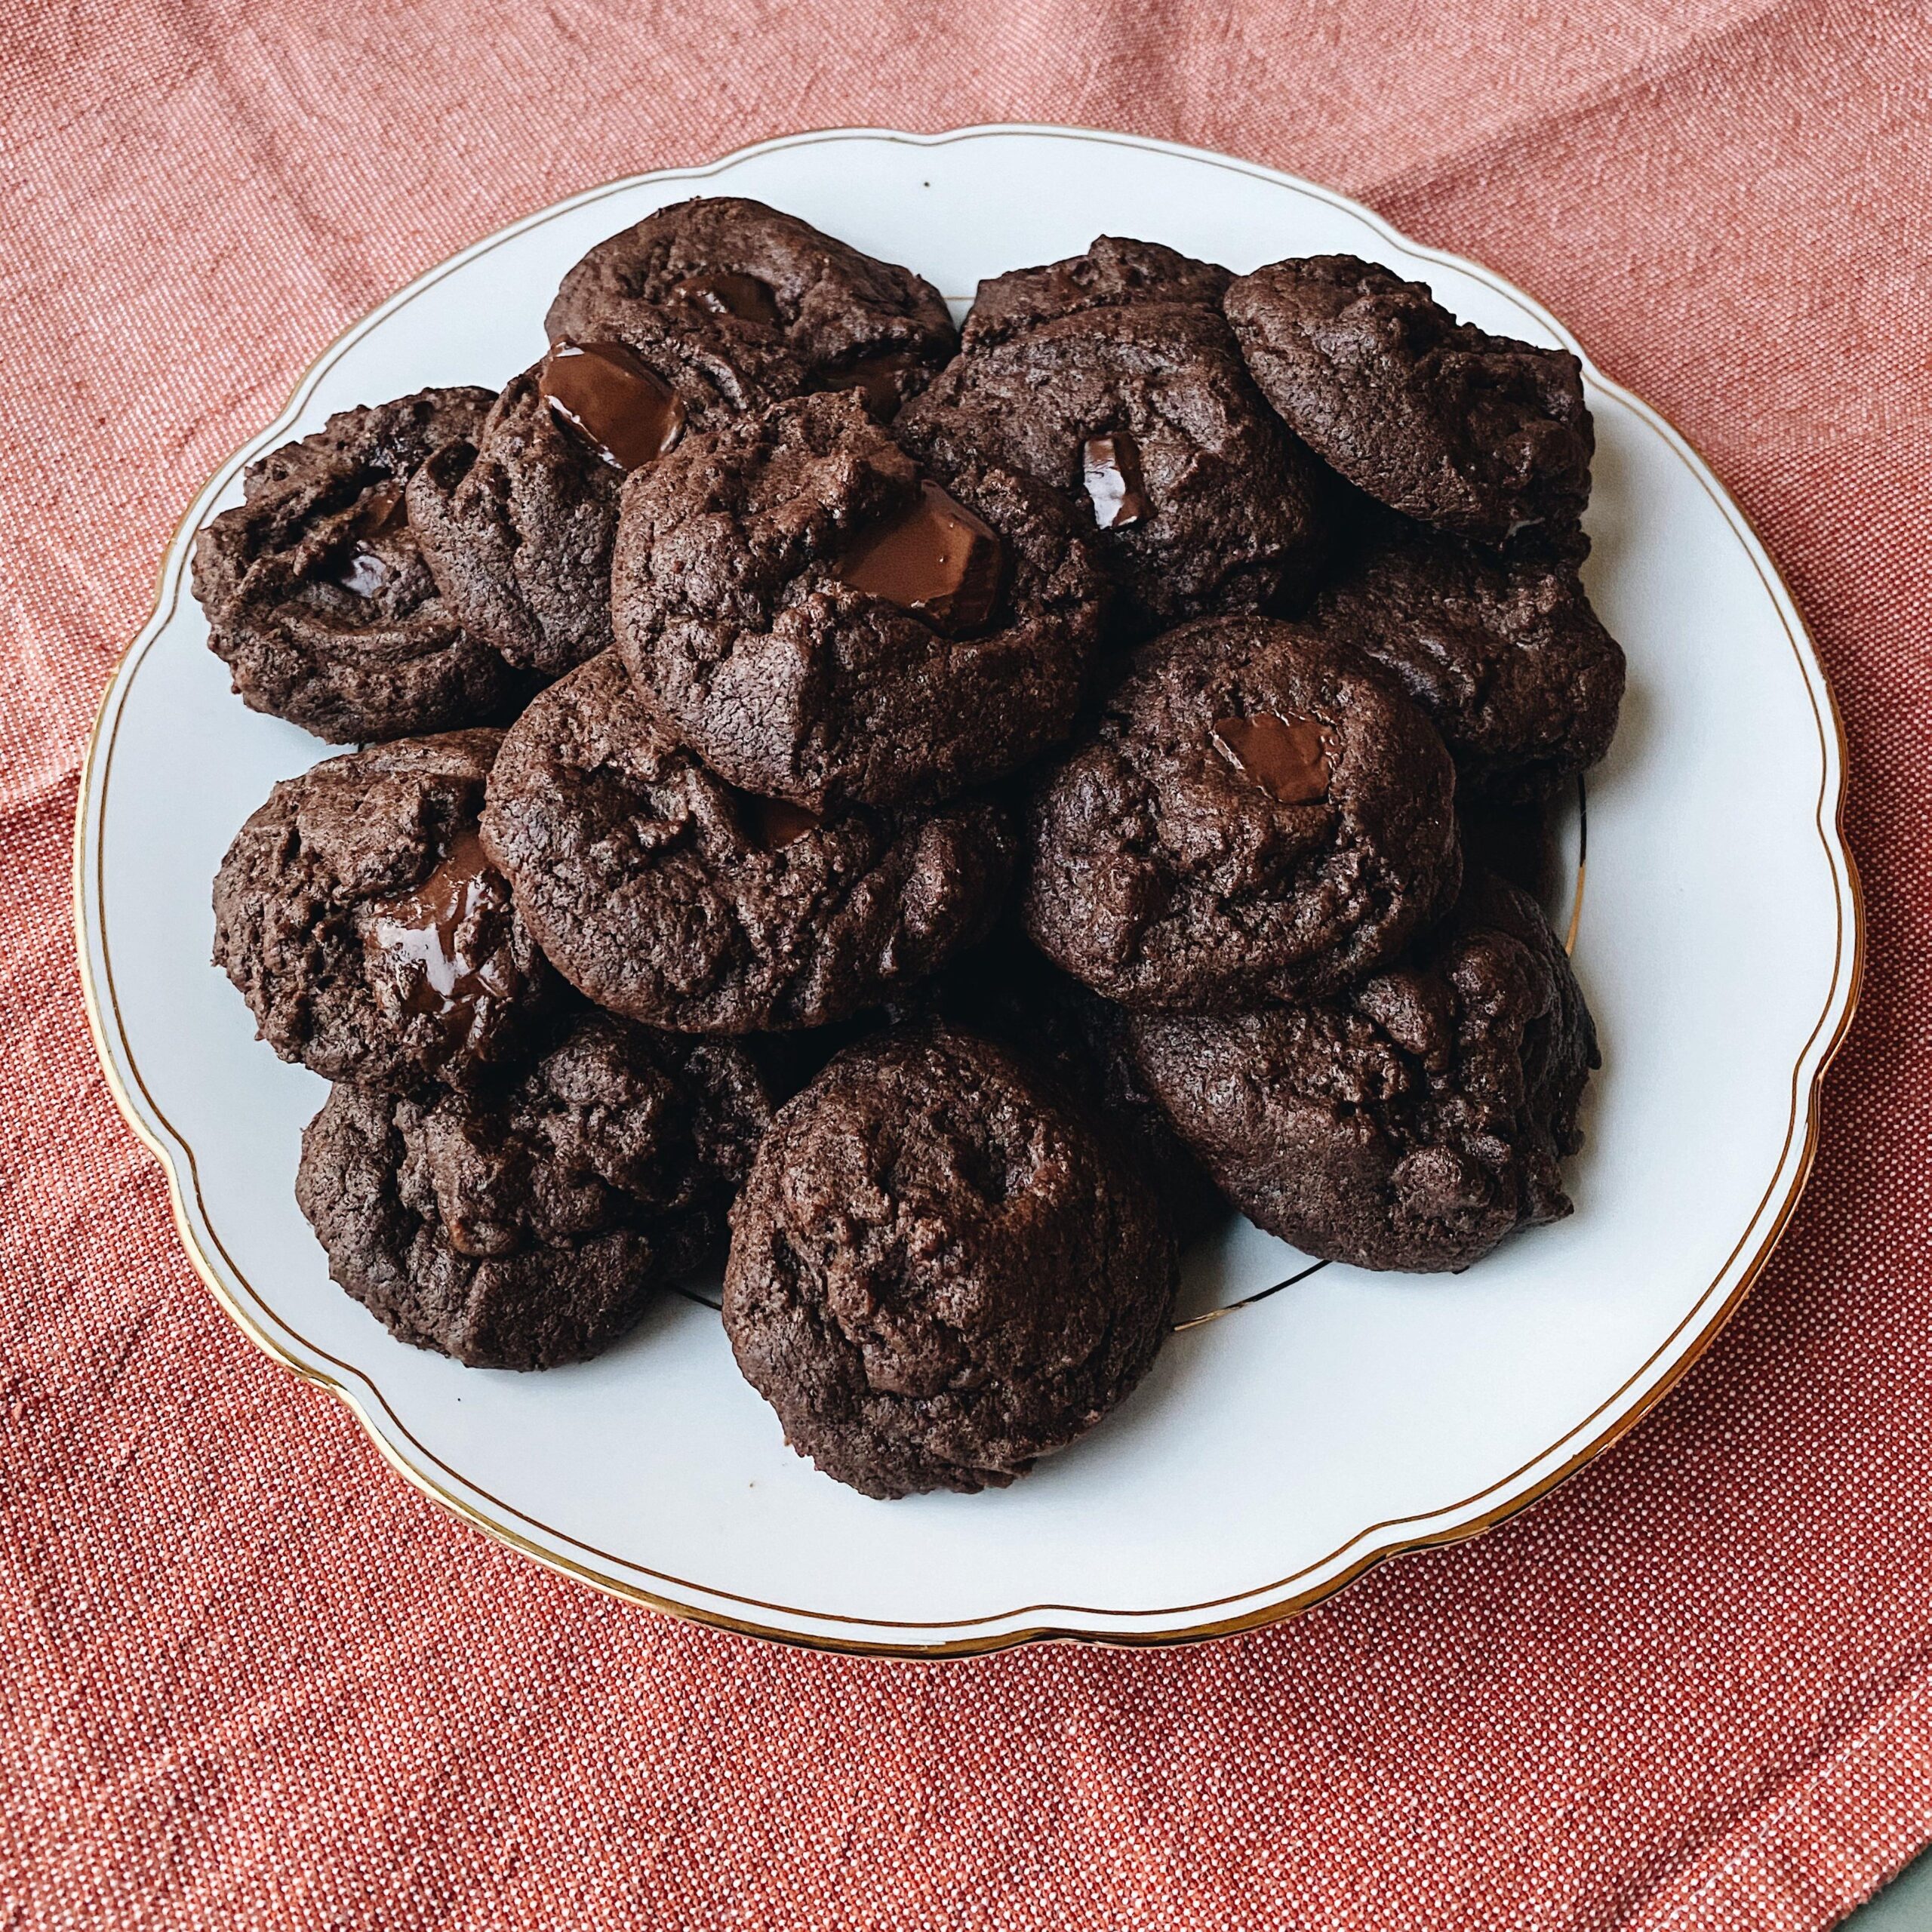  These cookies are guaranteed to satisfy your sweet tooth